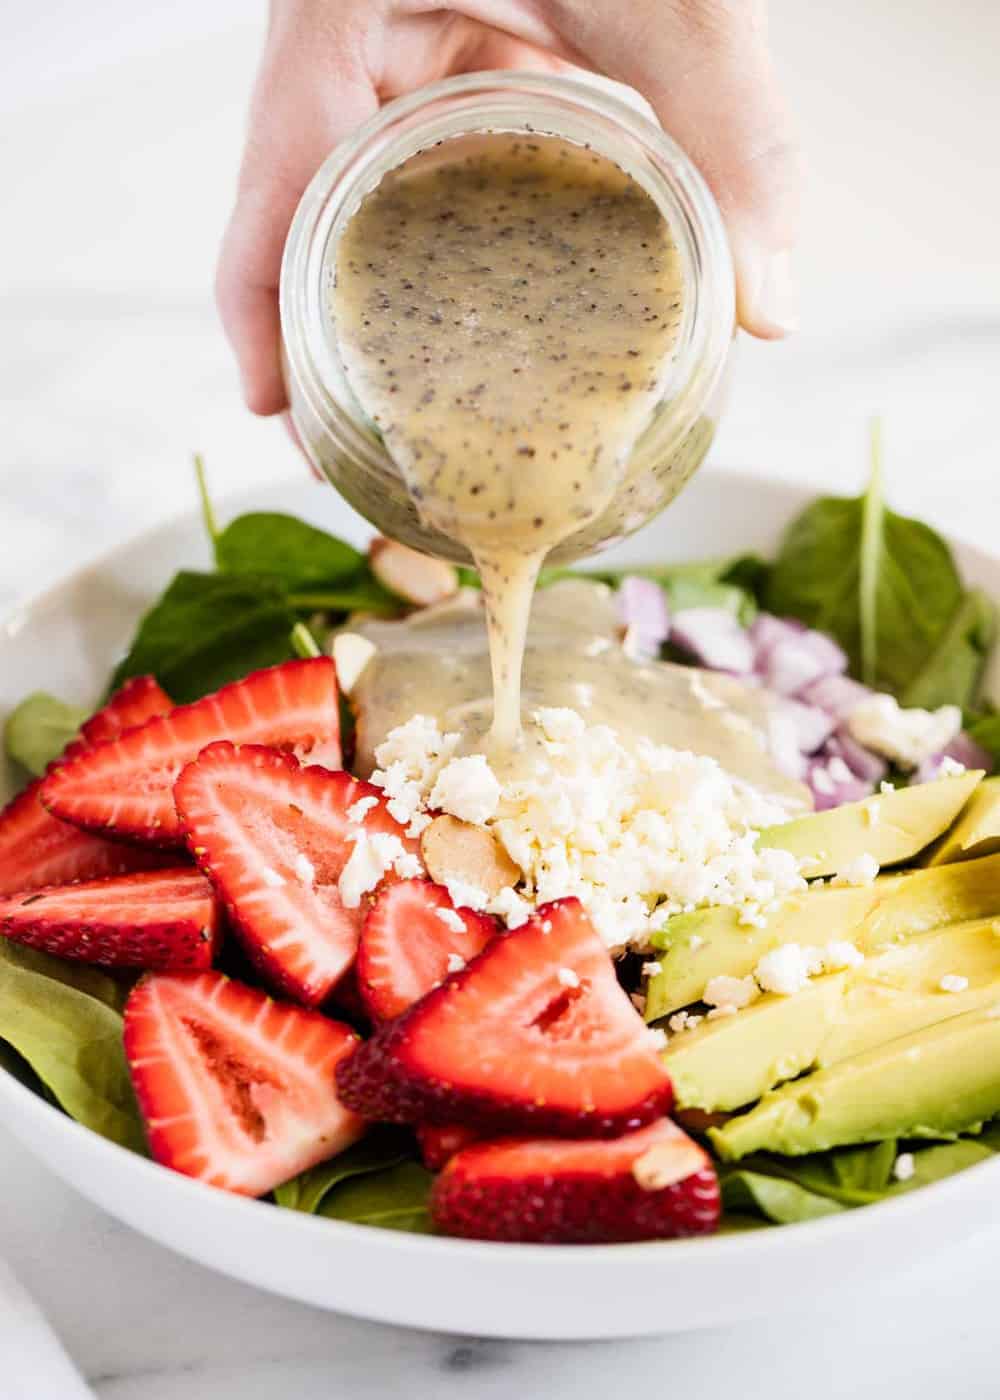 Pouring poppy seed dressing over strawberry spinach salad.